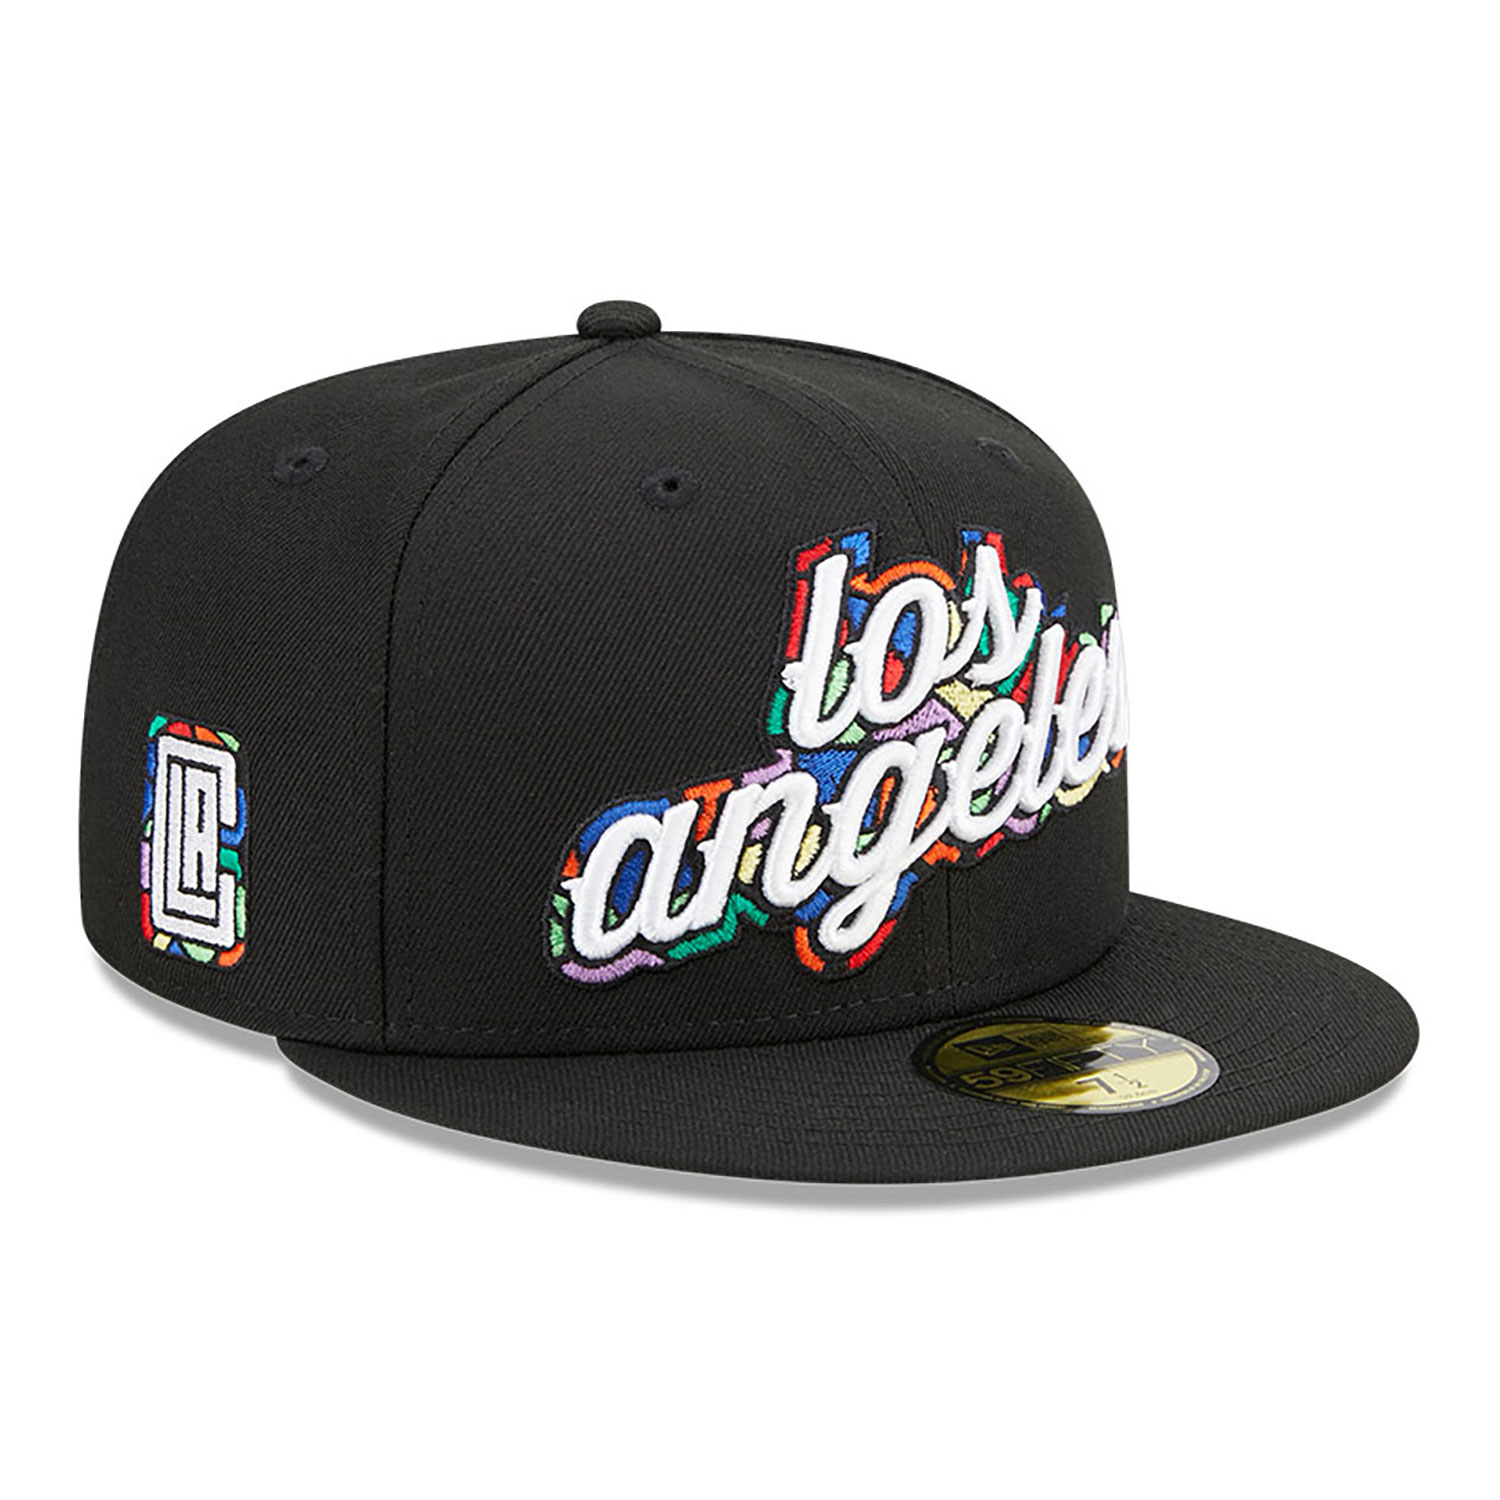 LA Clippers Authentics City Edition Black 59FIFTY Fitted Cap